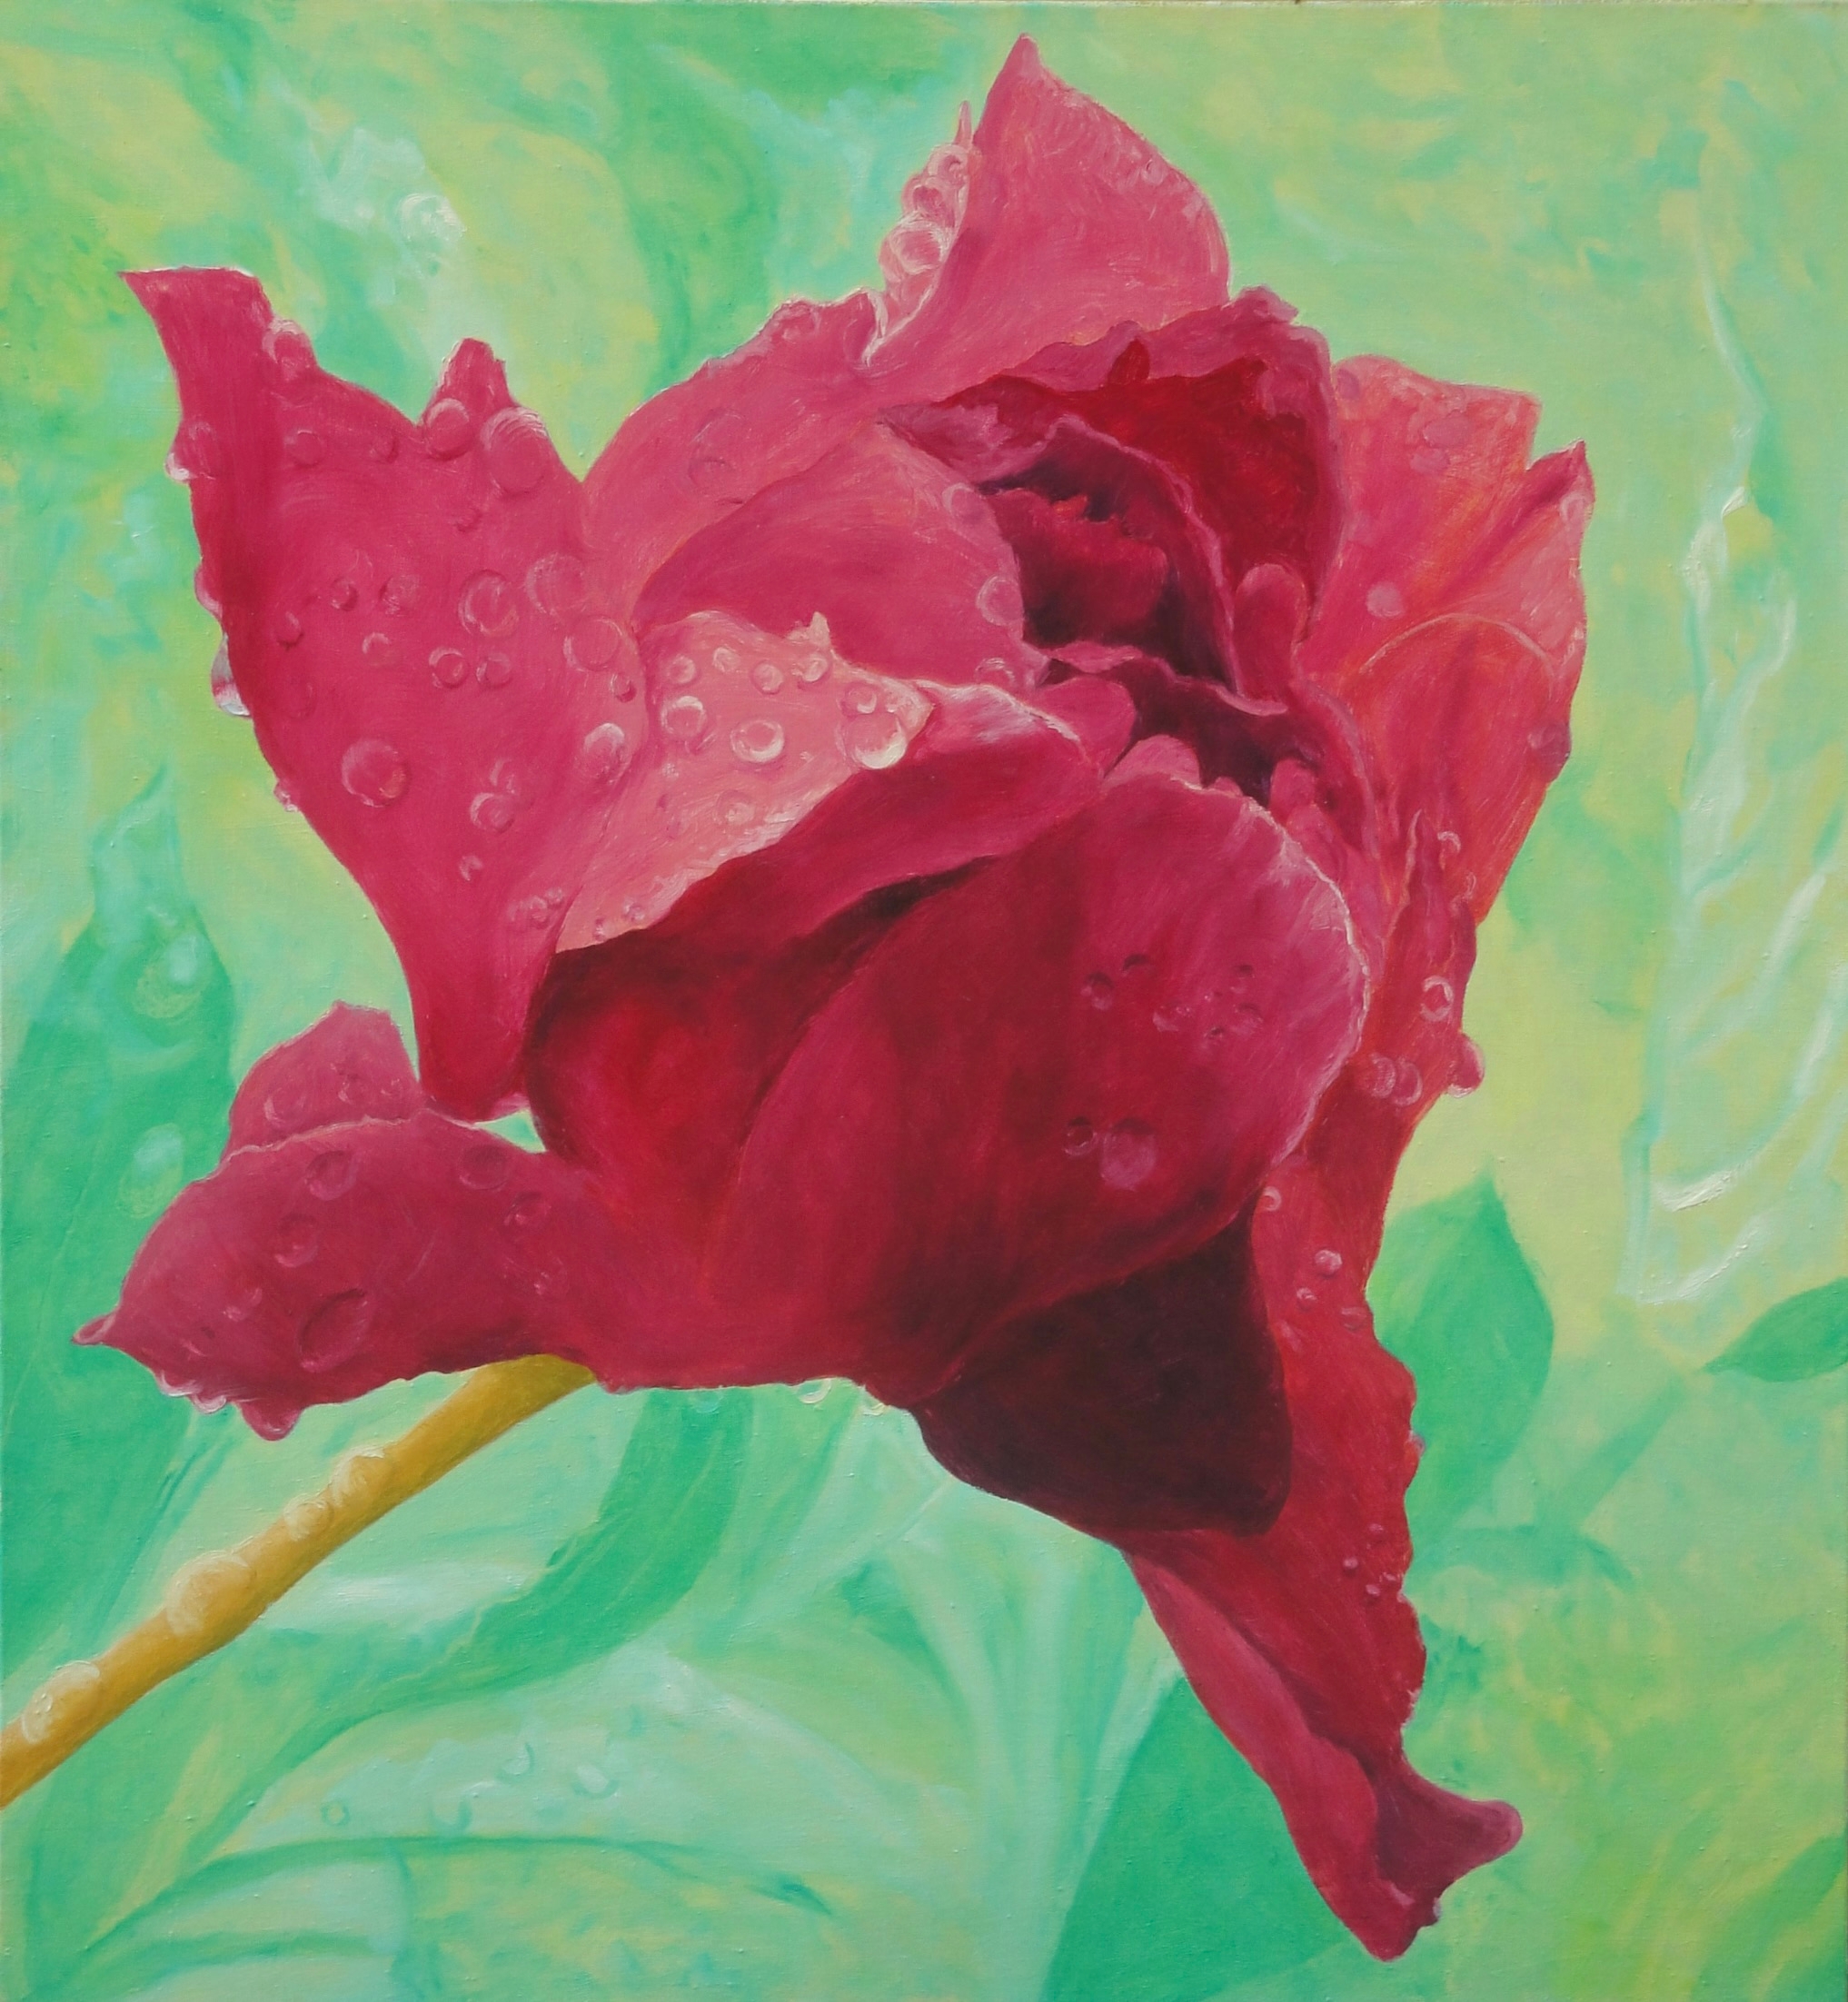 Donald Shambroom's painting from the Collection called Blossom depicting a Peony